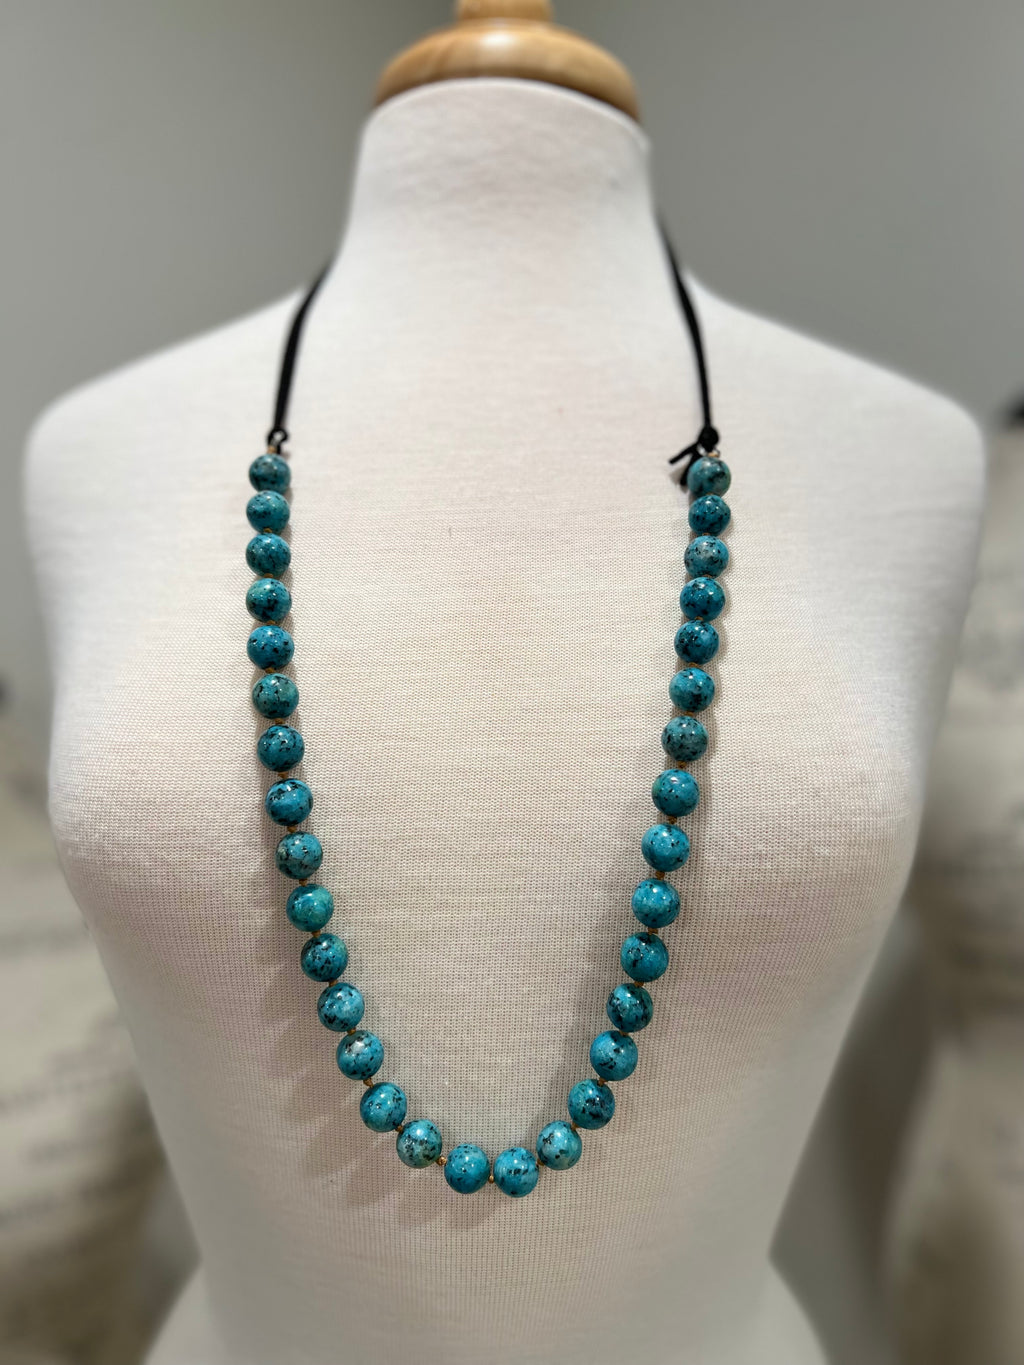 Black Leather Turquoise Bead Necklace